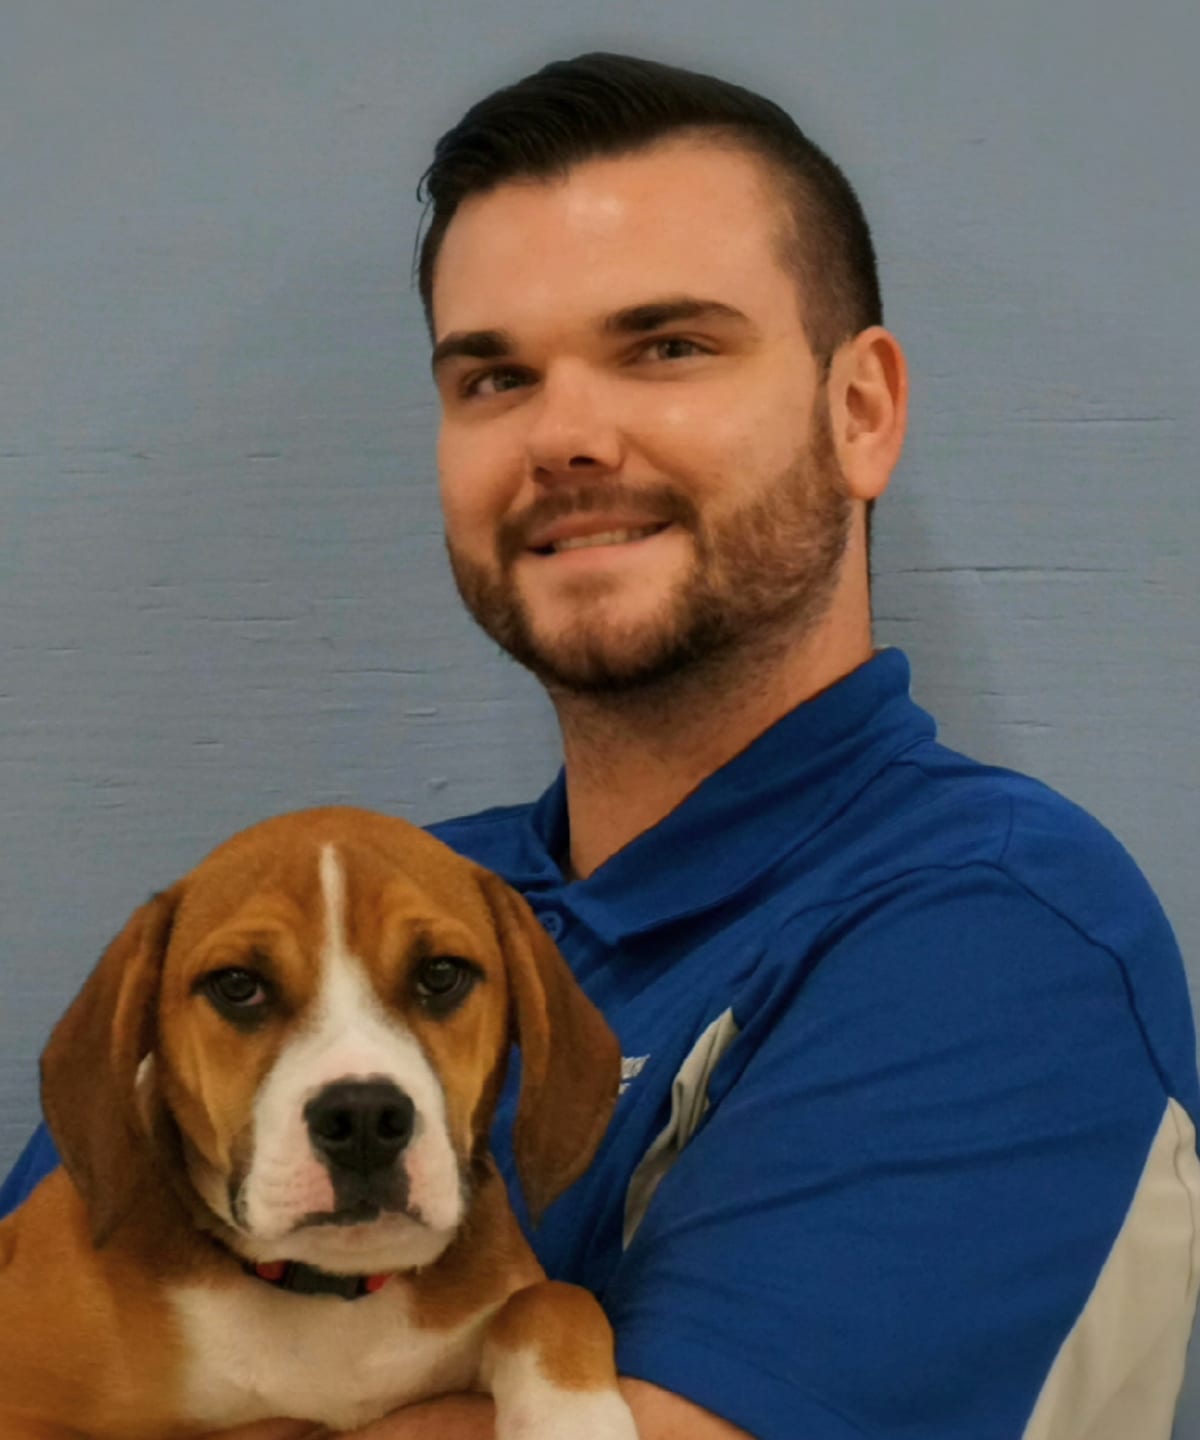 Thomas McDonald - Lead Dog Trainer at Leader of the Pack Canine Institute